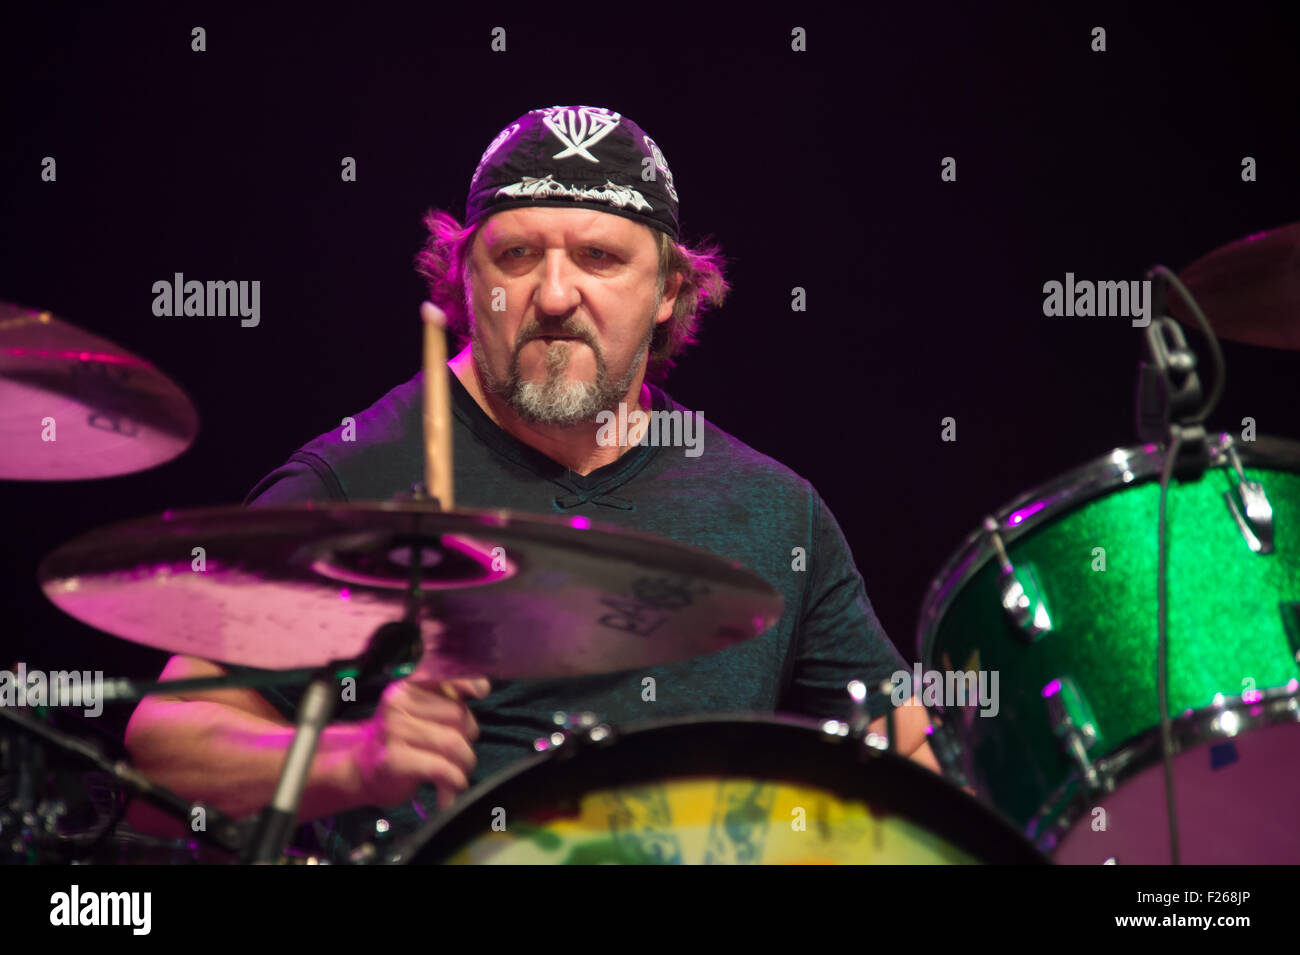 Drummer with Paul Rodgers performs on stage at Thunder Valley Casino Resort in in Lincoln, California Stock Photo